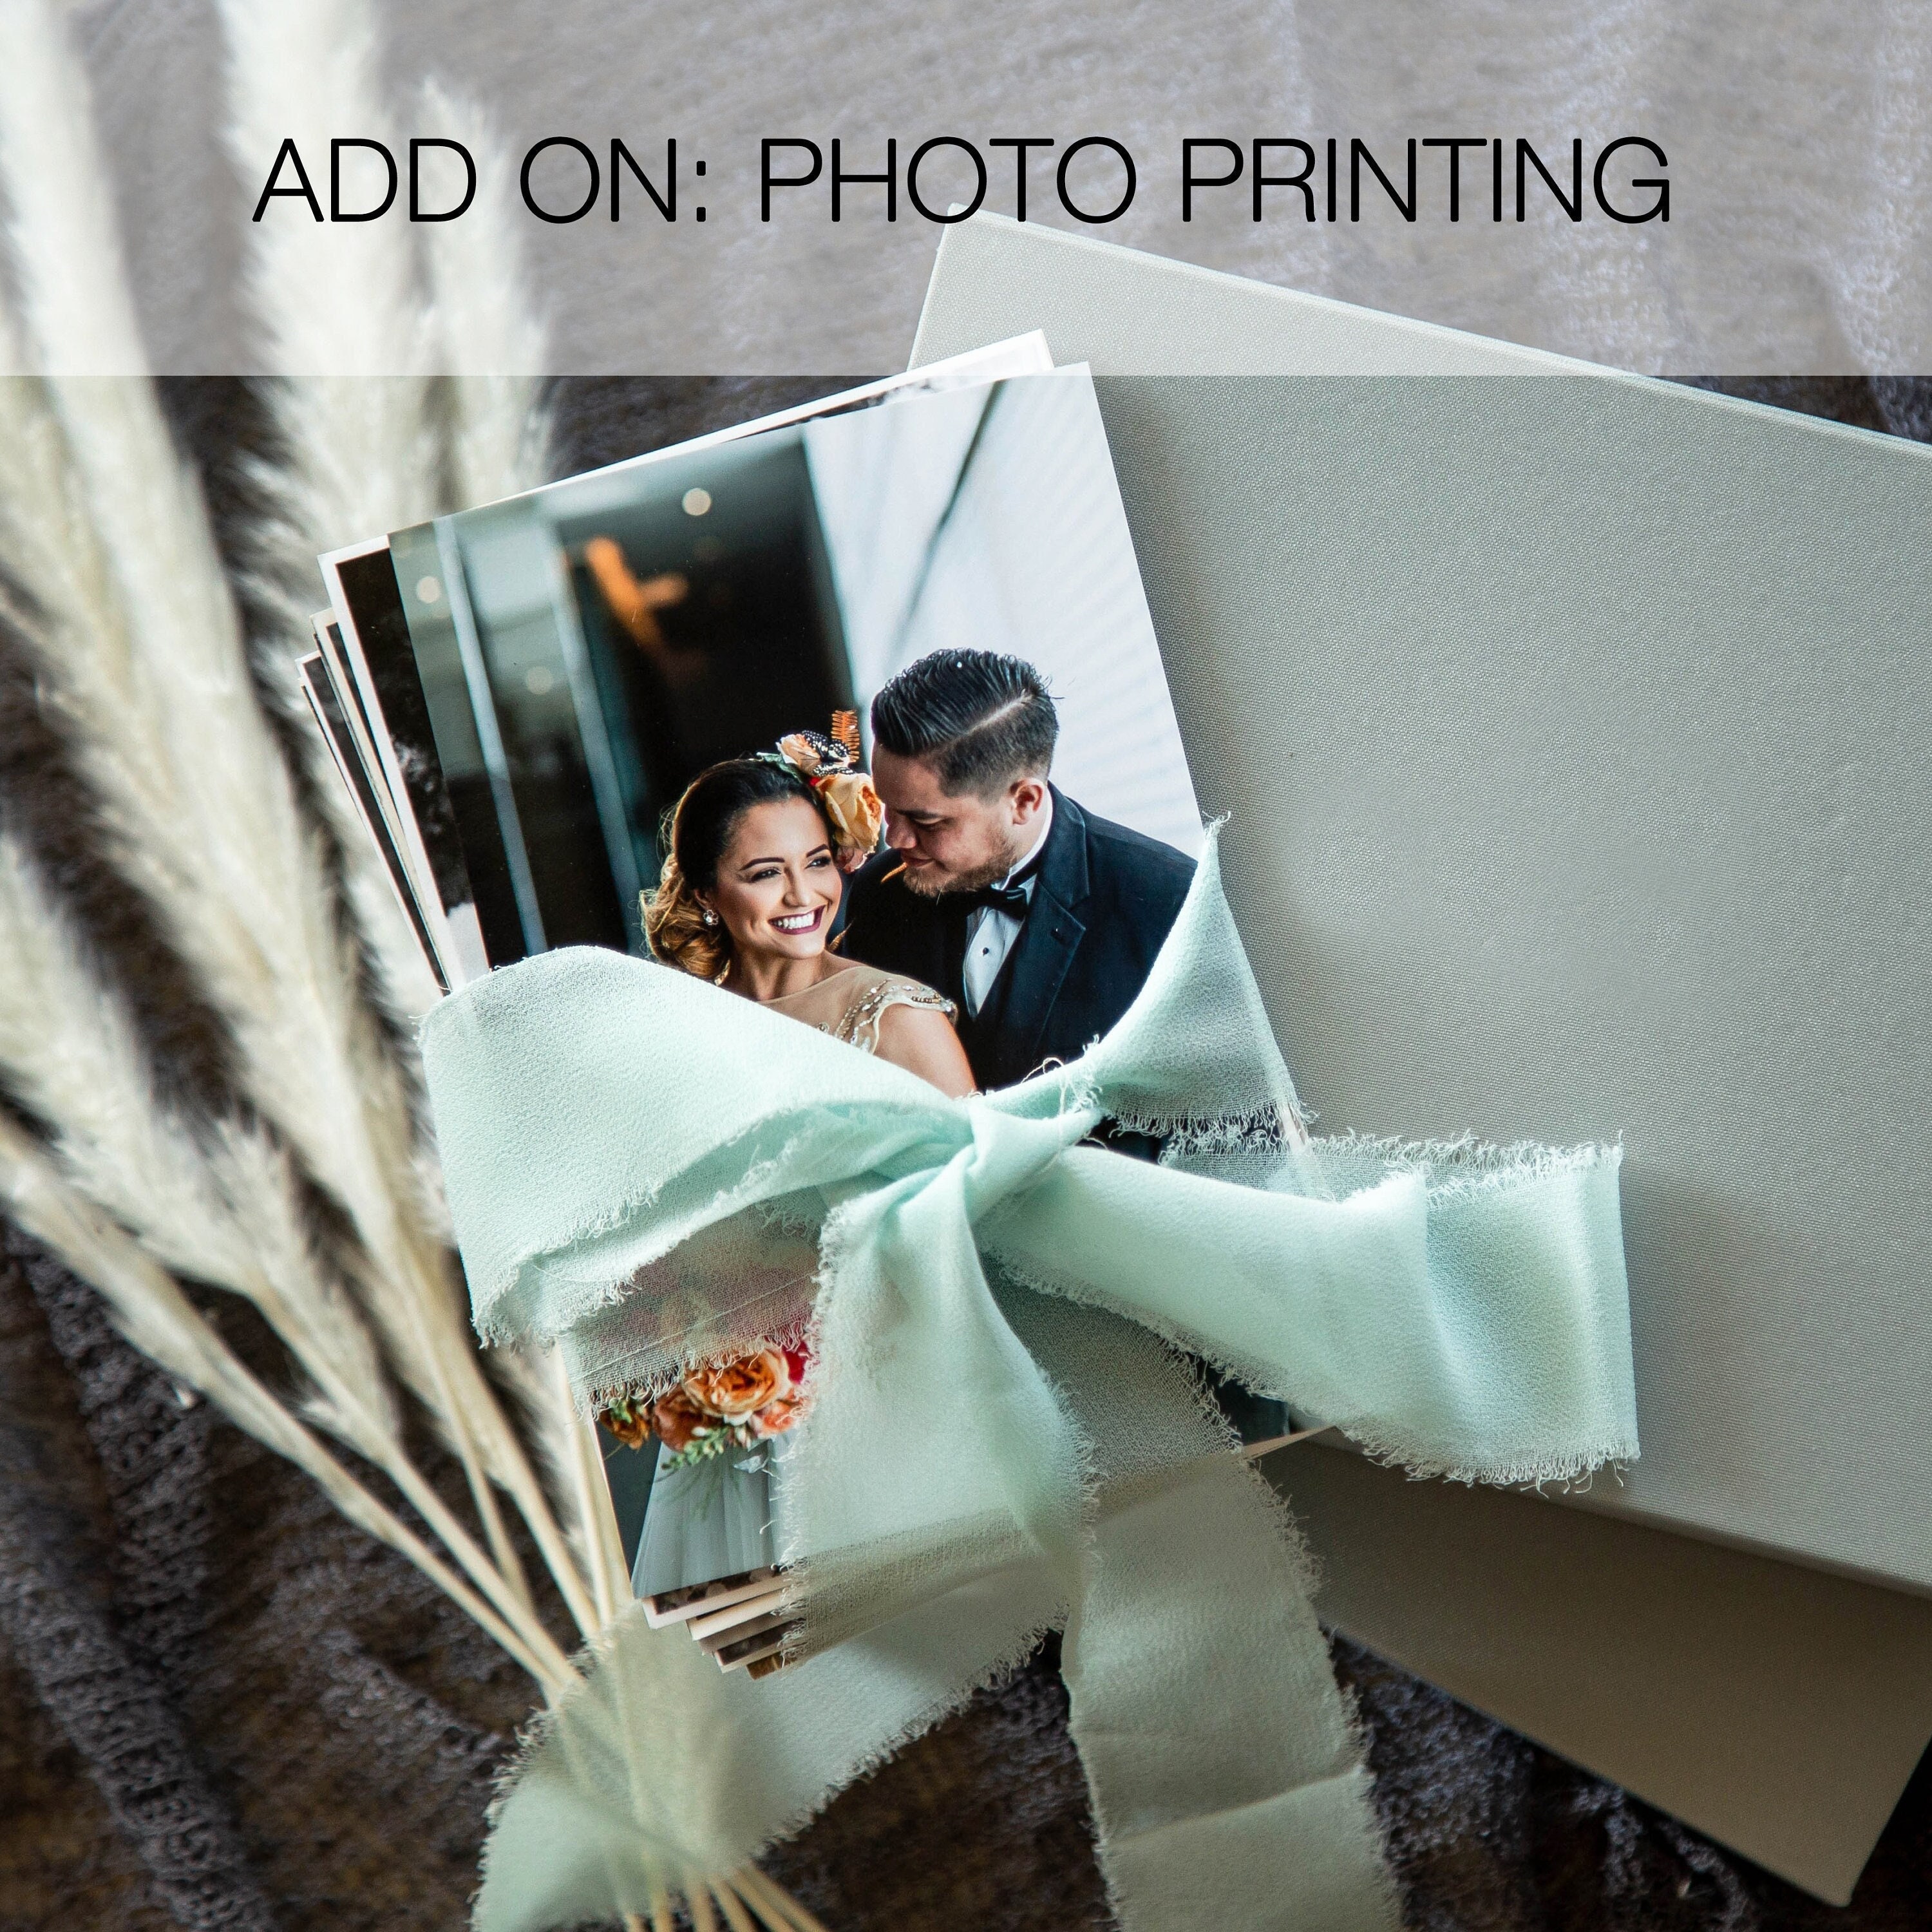 ADD ON: Photo Printing 4x6, 5x7 or 8x10 Picture Print Mats & Box NOT  Included 